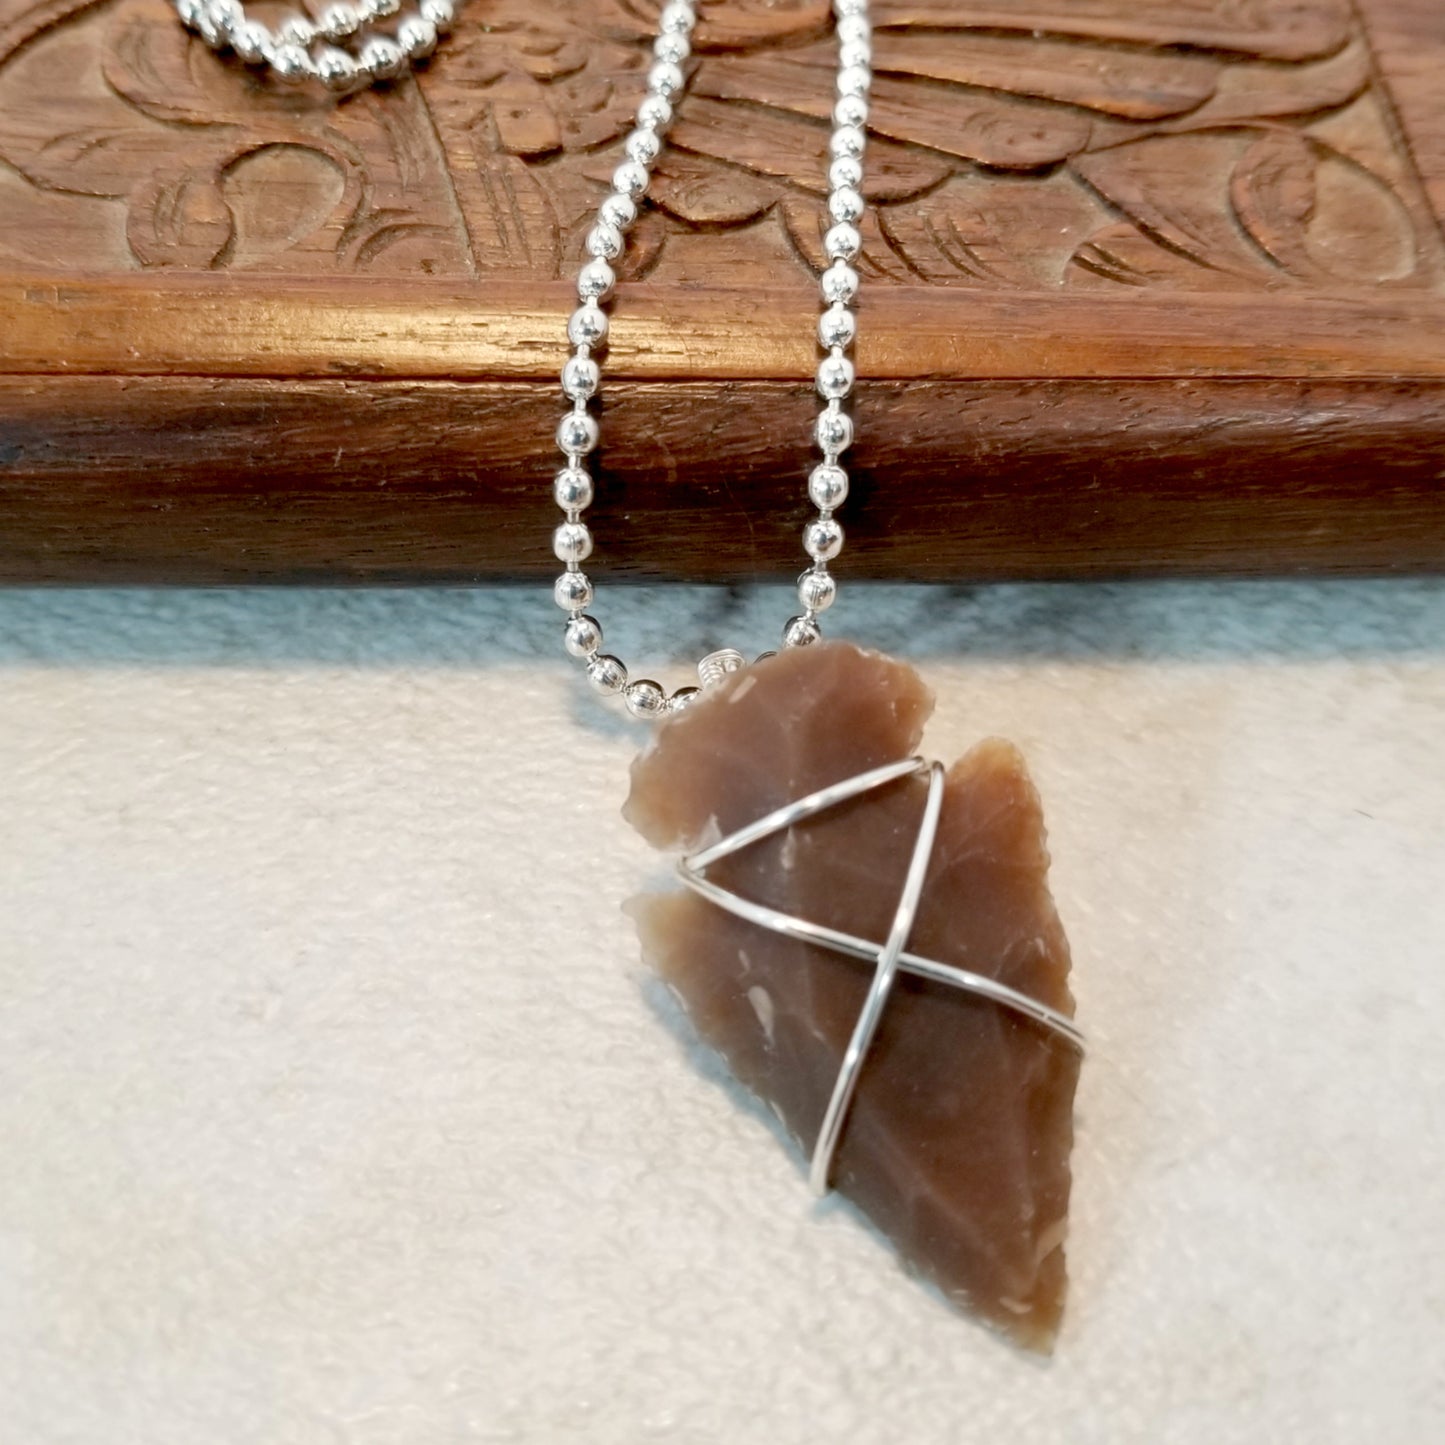 Arrowhead Pendant, Tribal Necklace, Wire Wrapped Jewelry